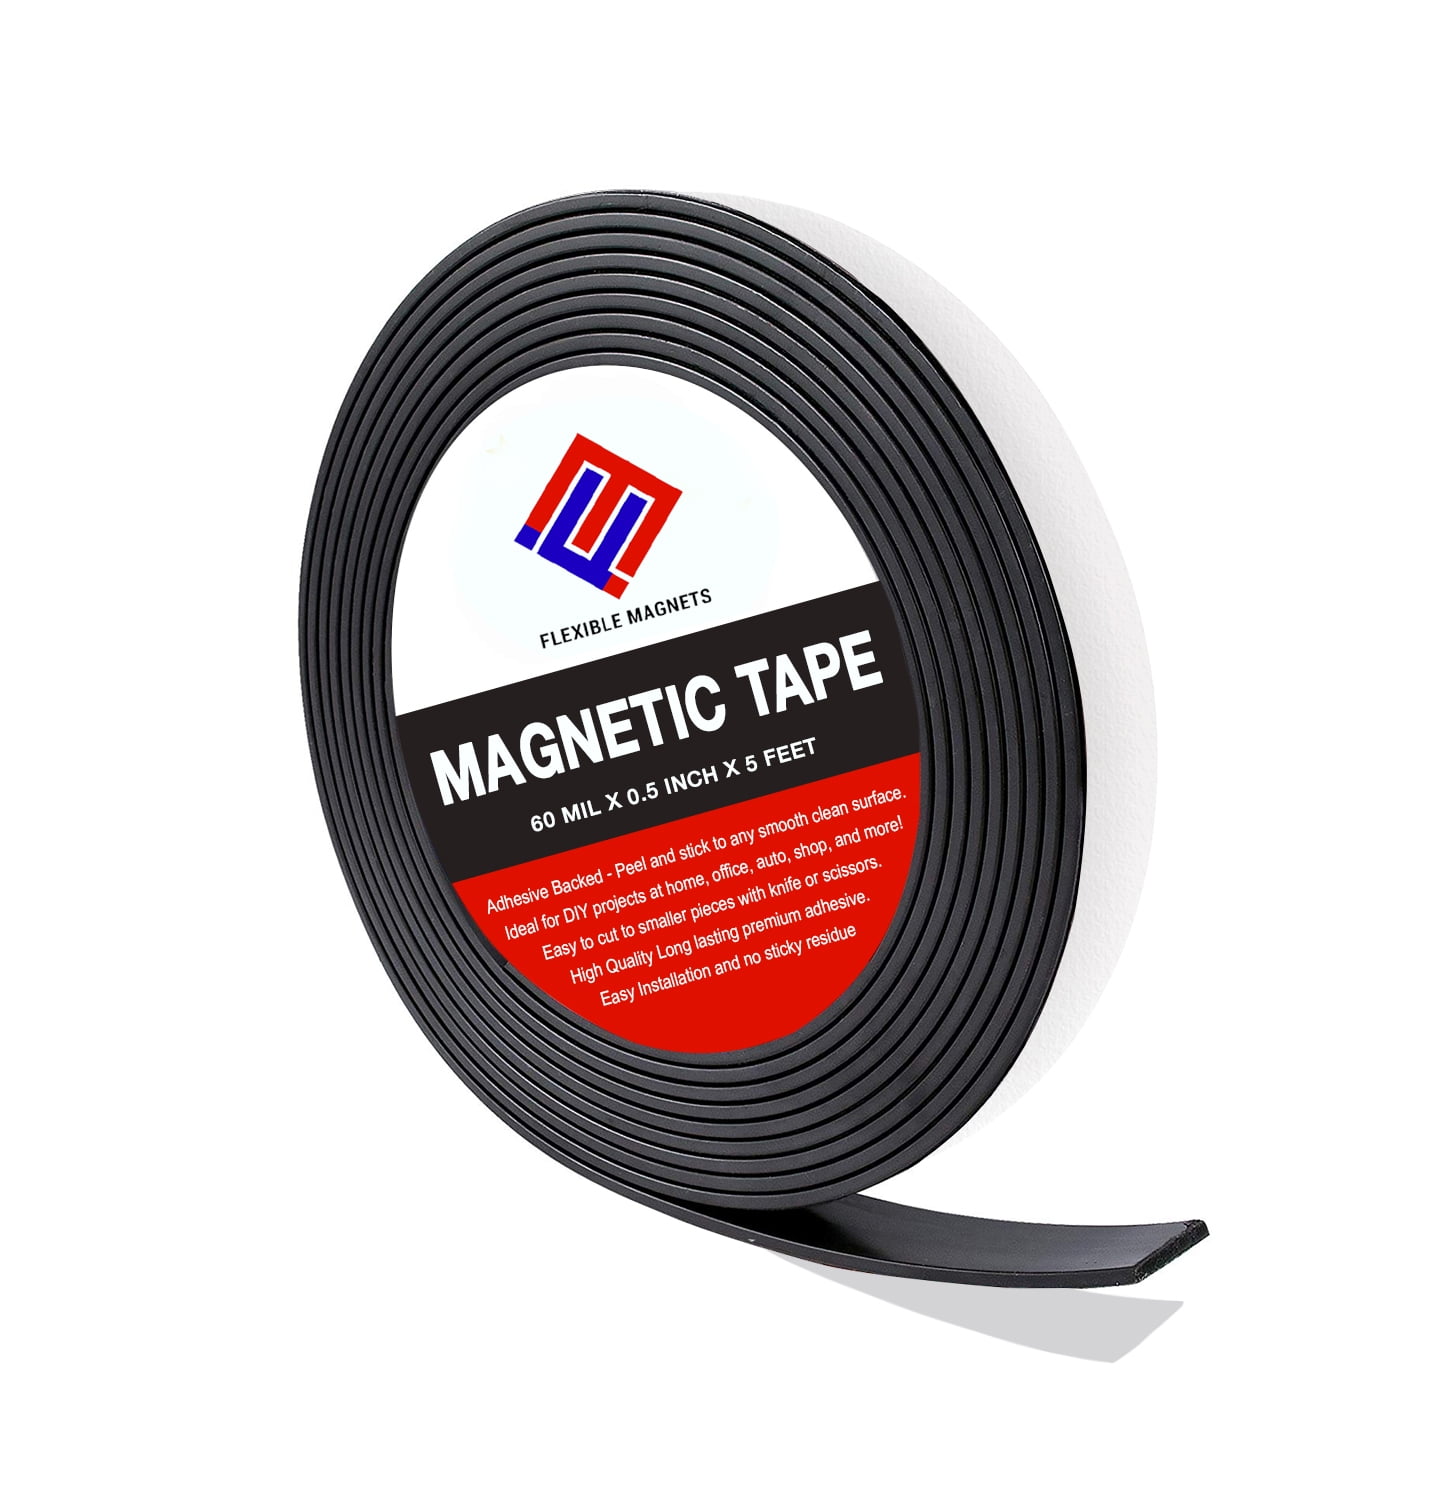 Flexible Magnetic Tape Roll with Adhesive Backing- Super Sticky! Superior Quality! by Flexible Magnets- 30mil x 2 in x 100 ft